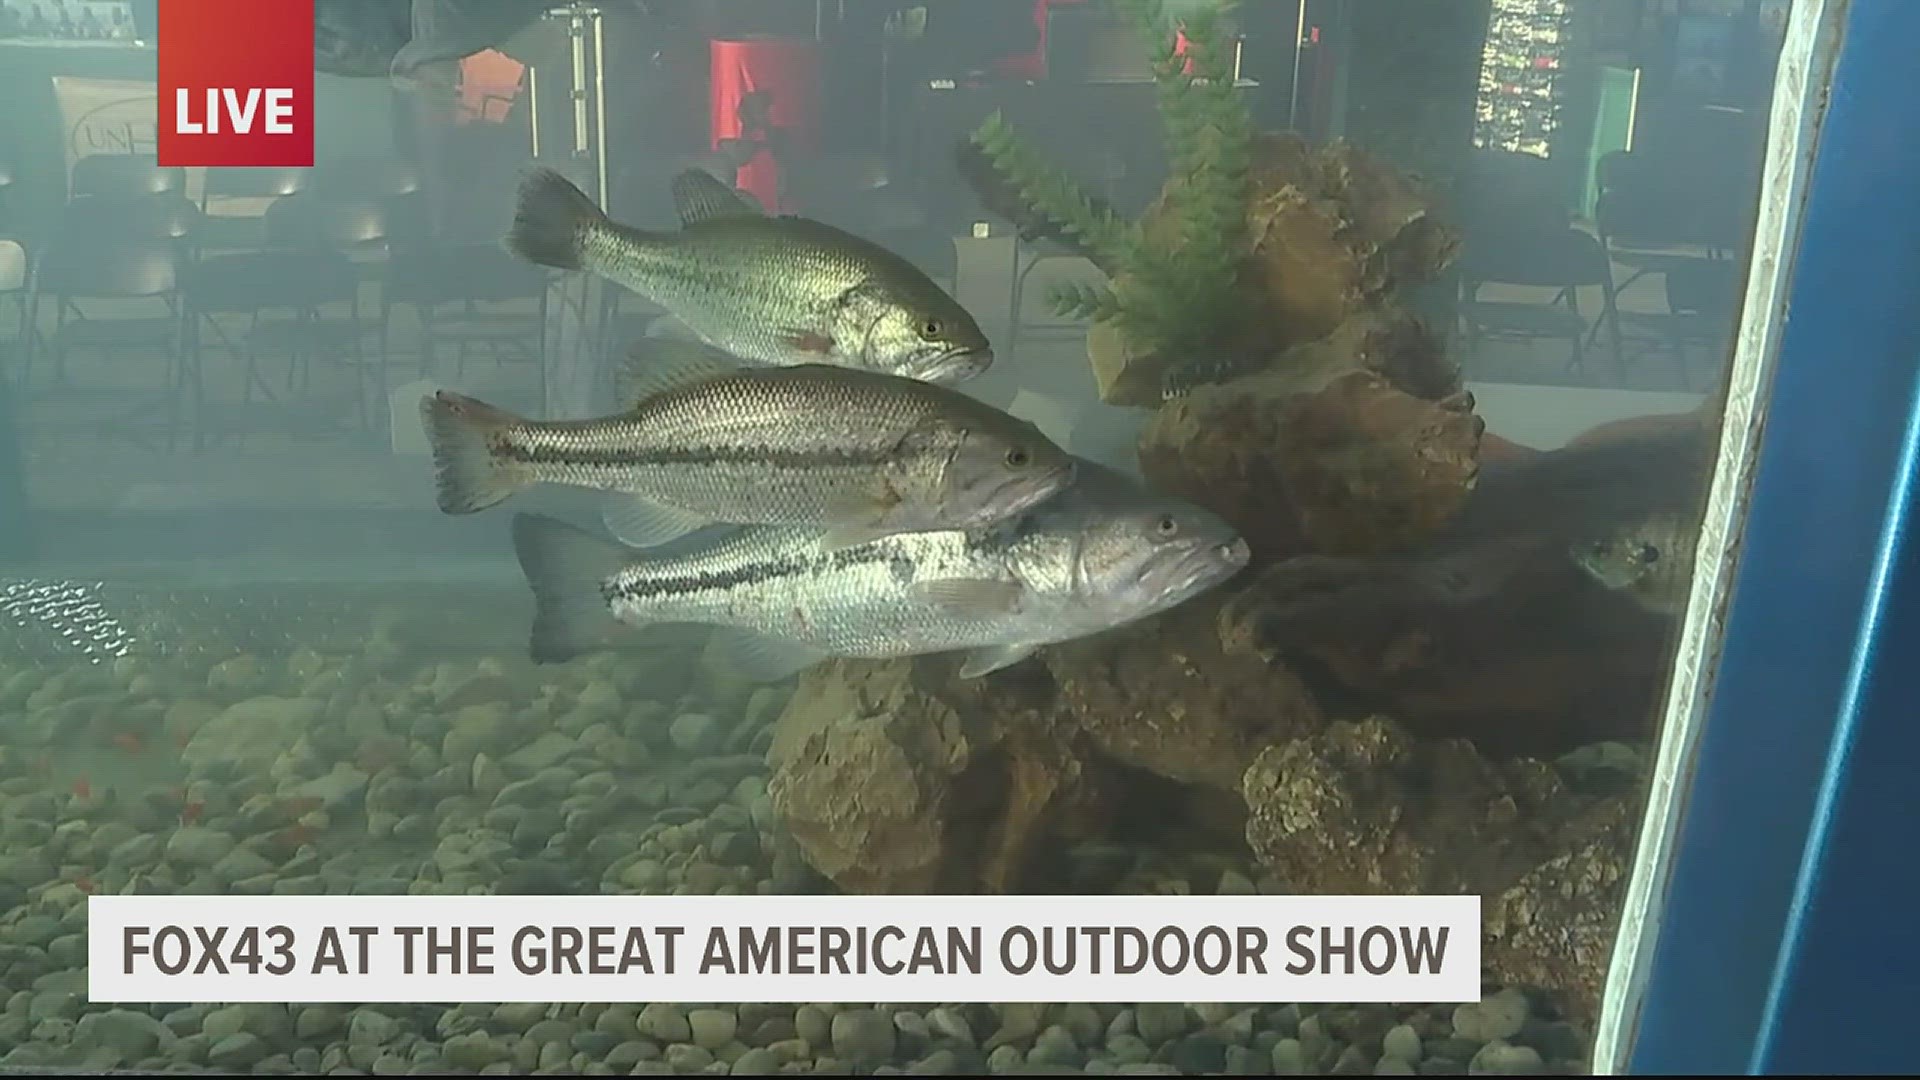 The Great American Outdoor Show is back in Harrisburg, and has over 1,000 exhibits.